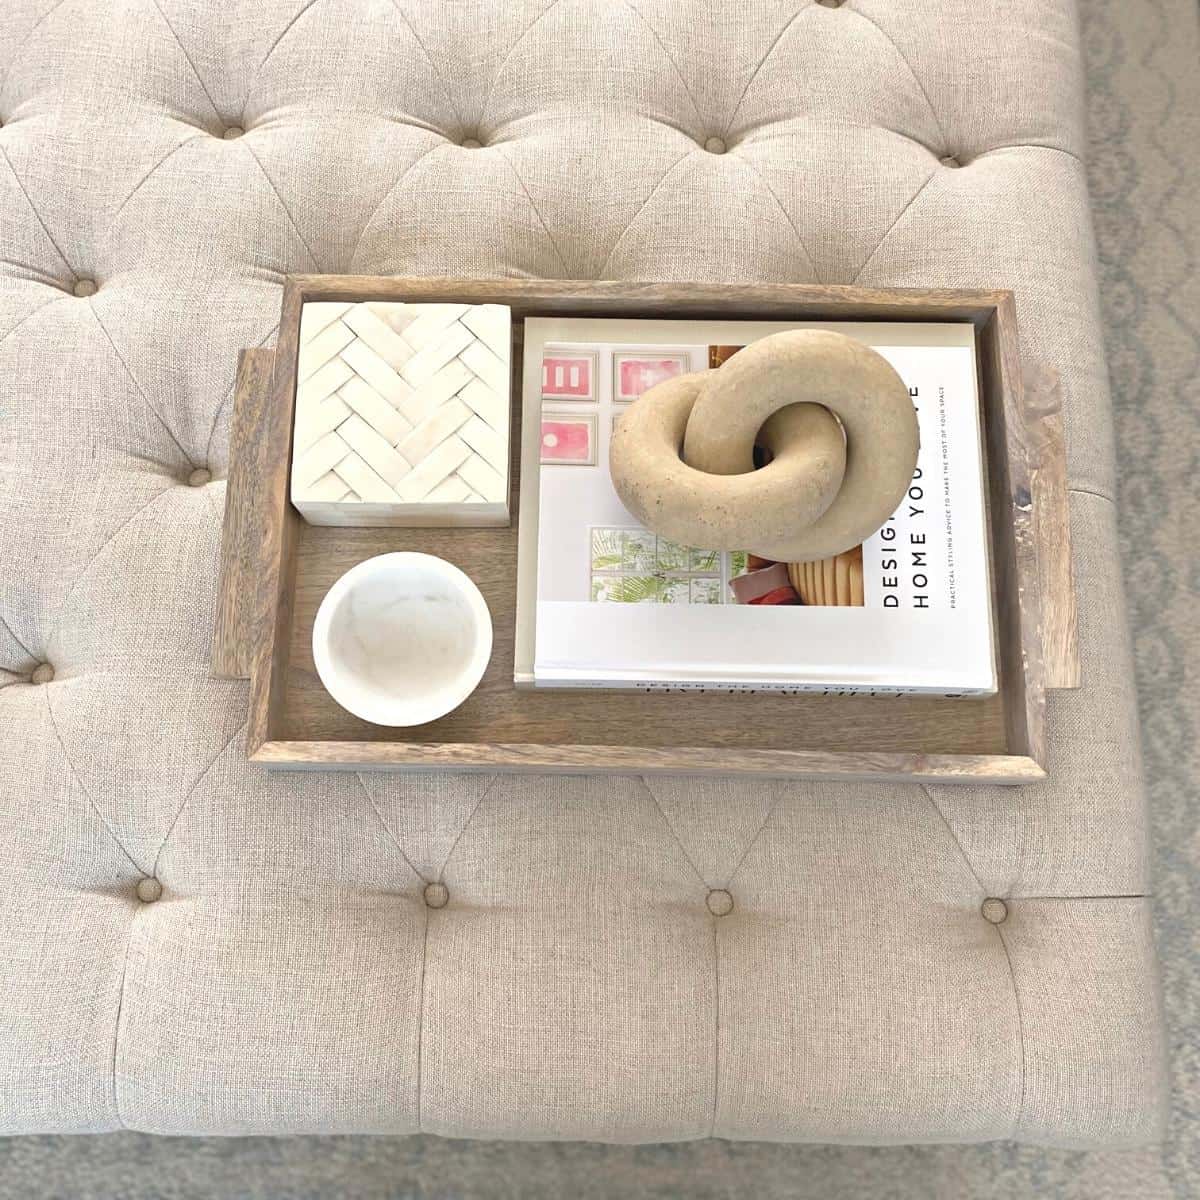 How To Style A Coffee Table - Staci Edwards Interior Design